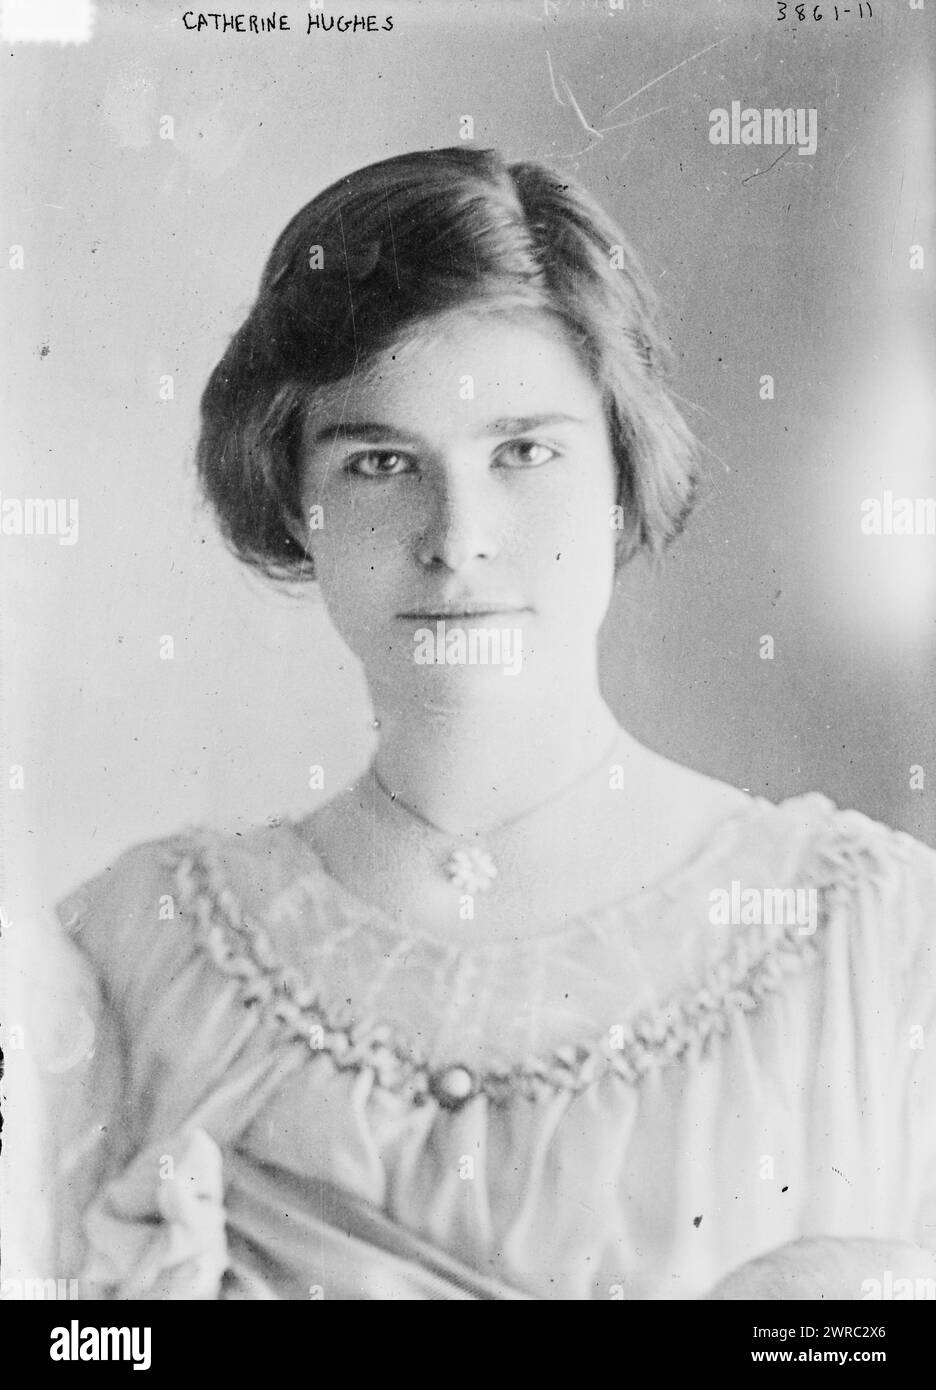 Catherine Hughes, Photograph shows Catherine Hughes (1898-1961) daughter of the governor of New York and Supreme Court associate justice Charles Evans Hughes, Sr. (1862-1948)., between ca. 1915 and ca. 1920, Glass negatives, 1 negative: glass Stock Photo